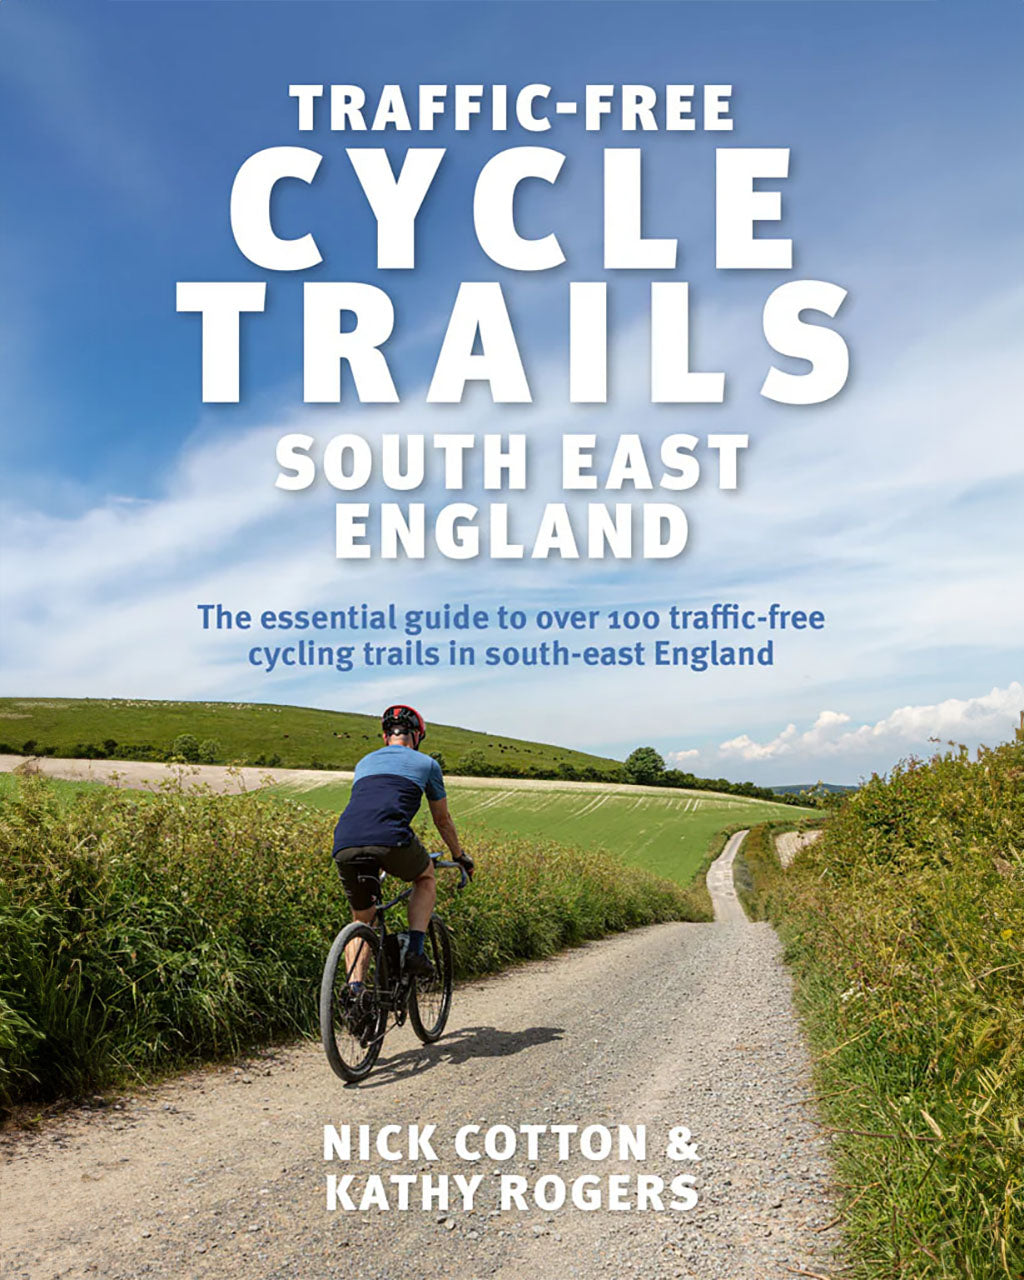 Traffic Free Cycle Trails South East England by Nick Cotton & Kathy Rogers